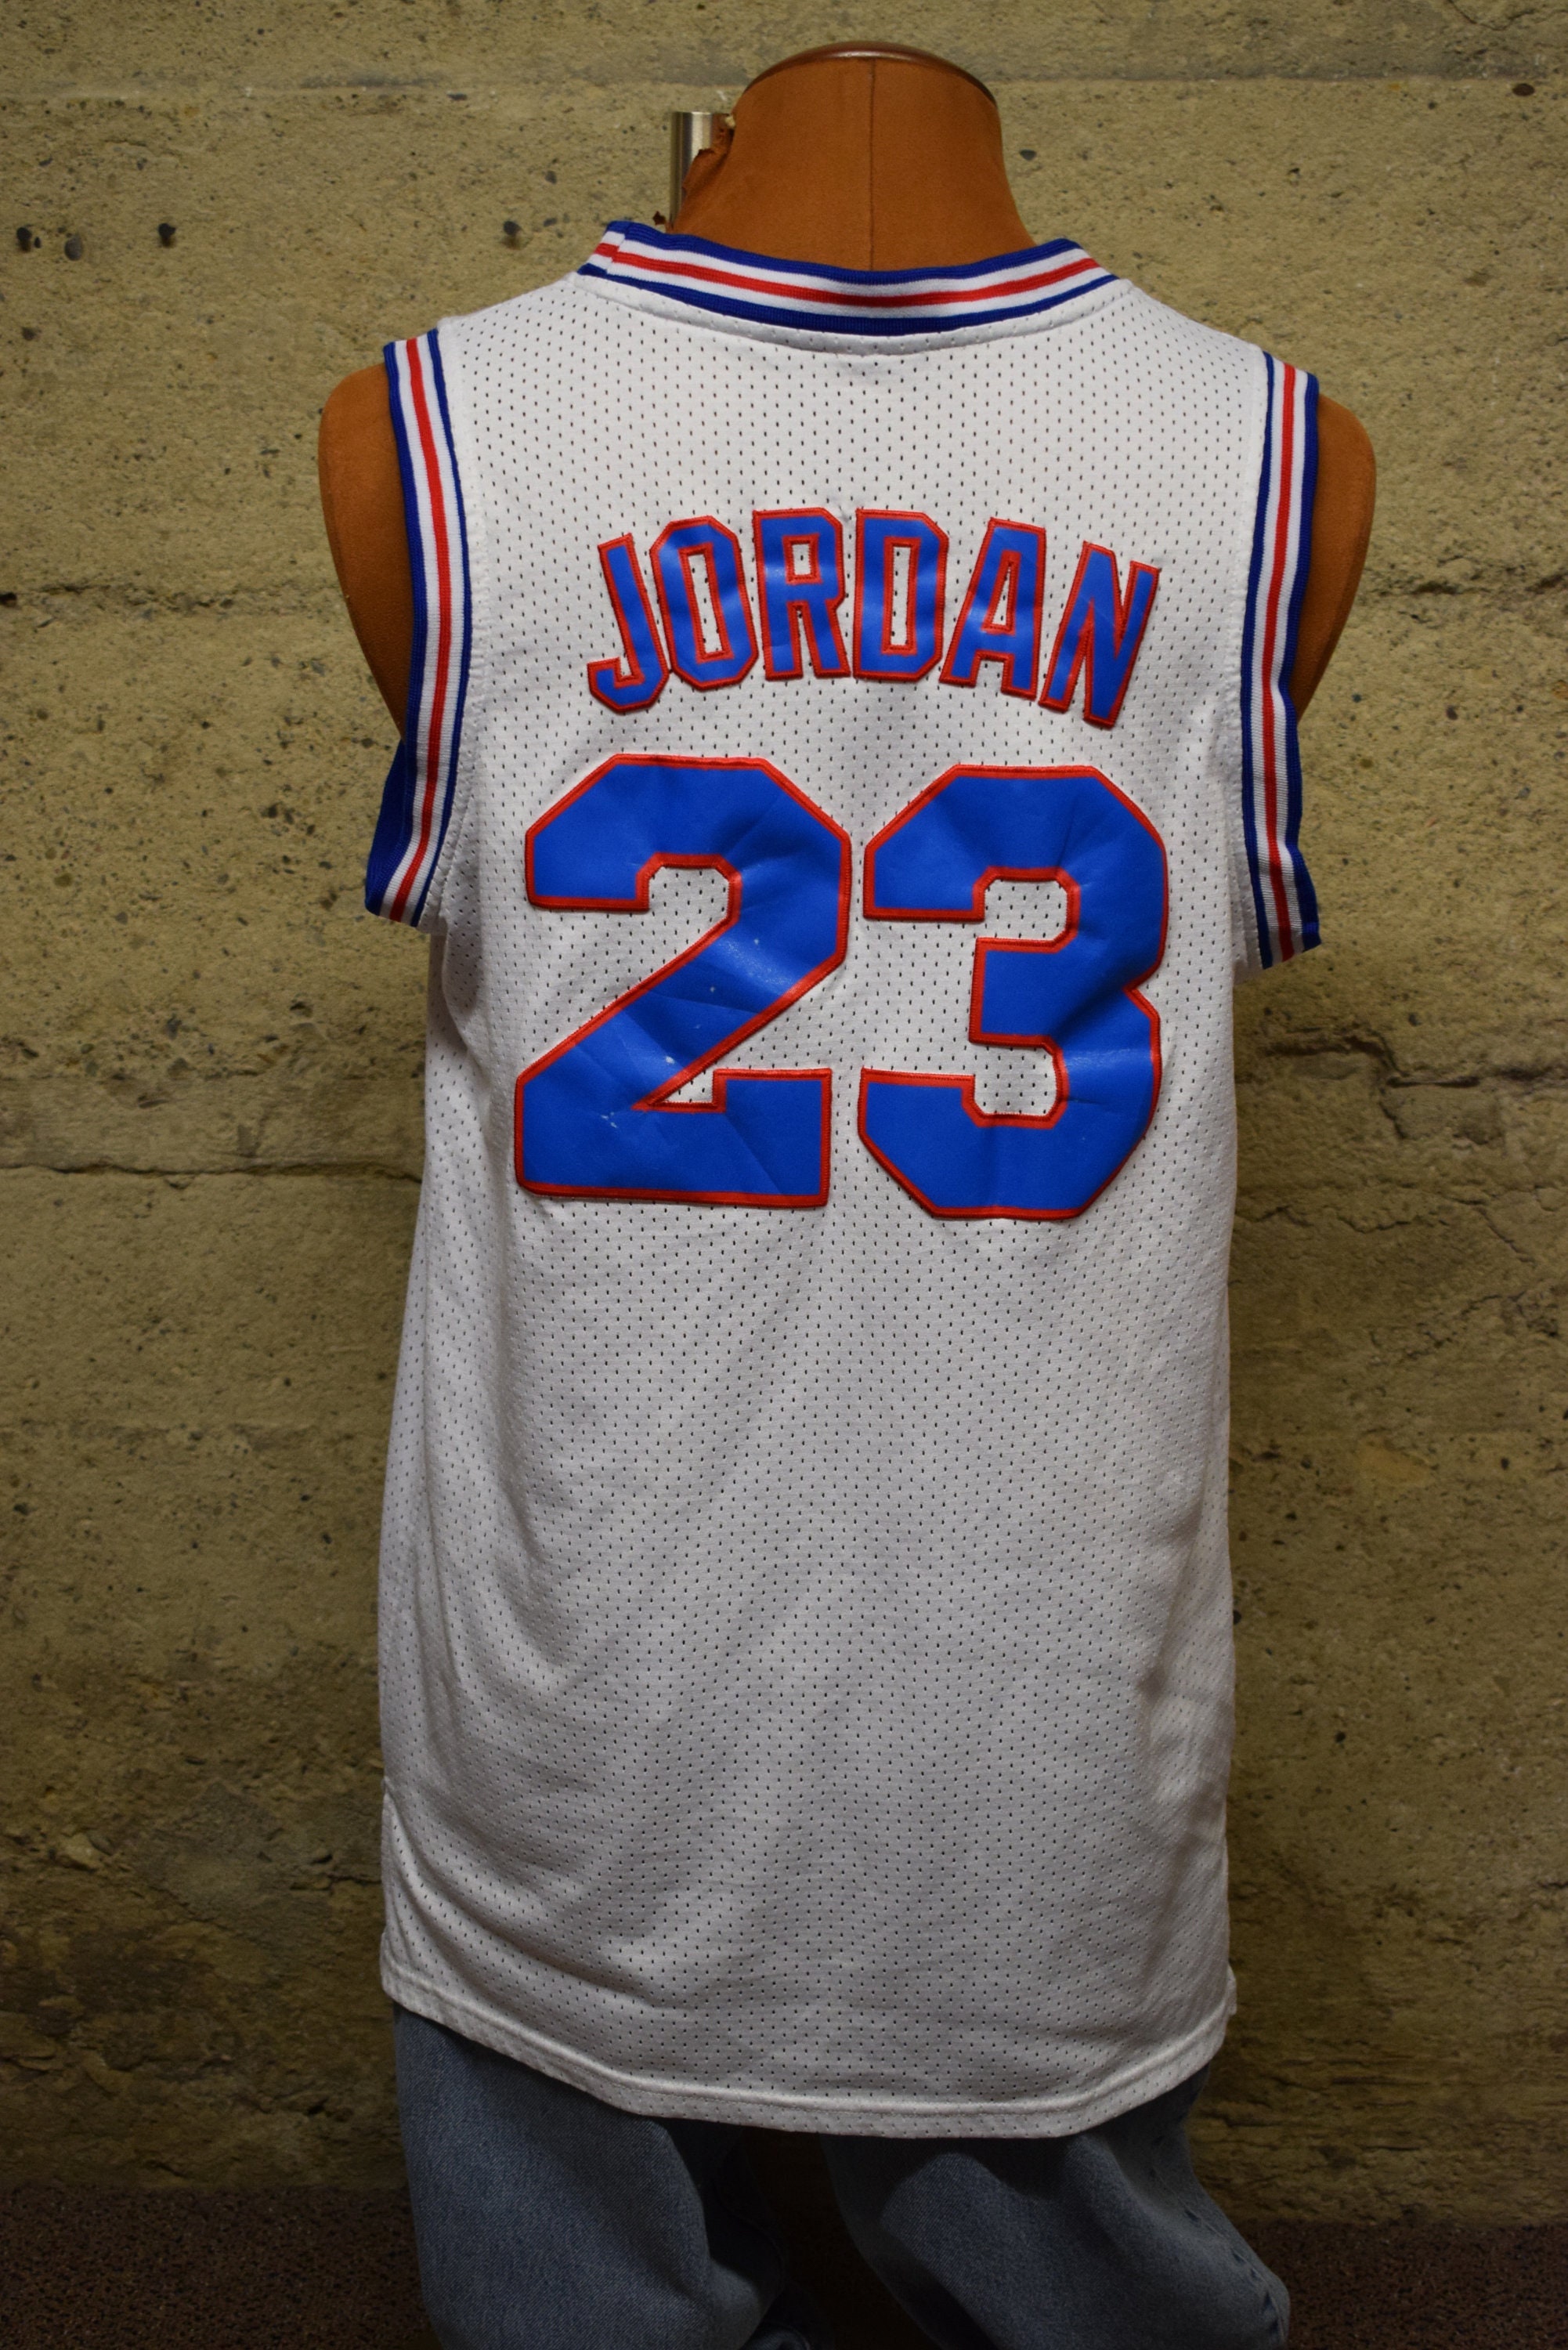 Space Jam Michael Jordan Jersey youth Large for Sale in